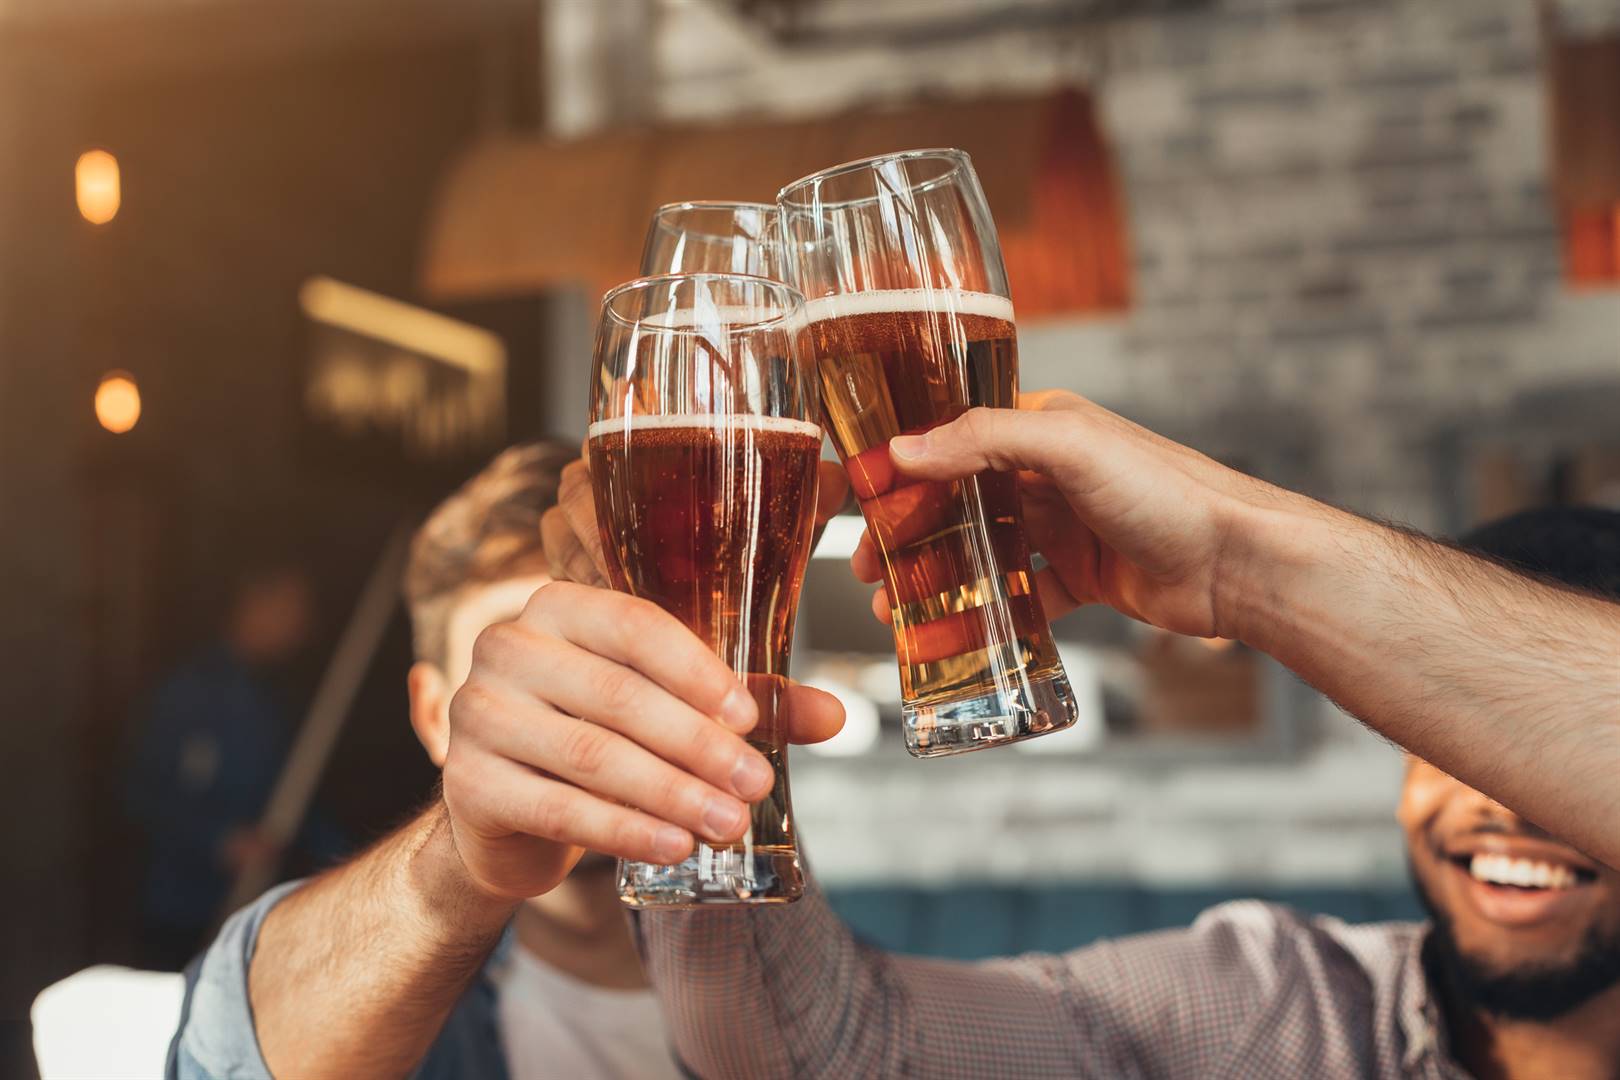 The alcohol ban has been lifted, and many bars are open once again. But will South Africans be able to drink responsibly? Picture: iStock/Gallo Images